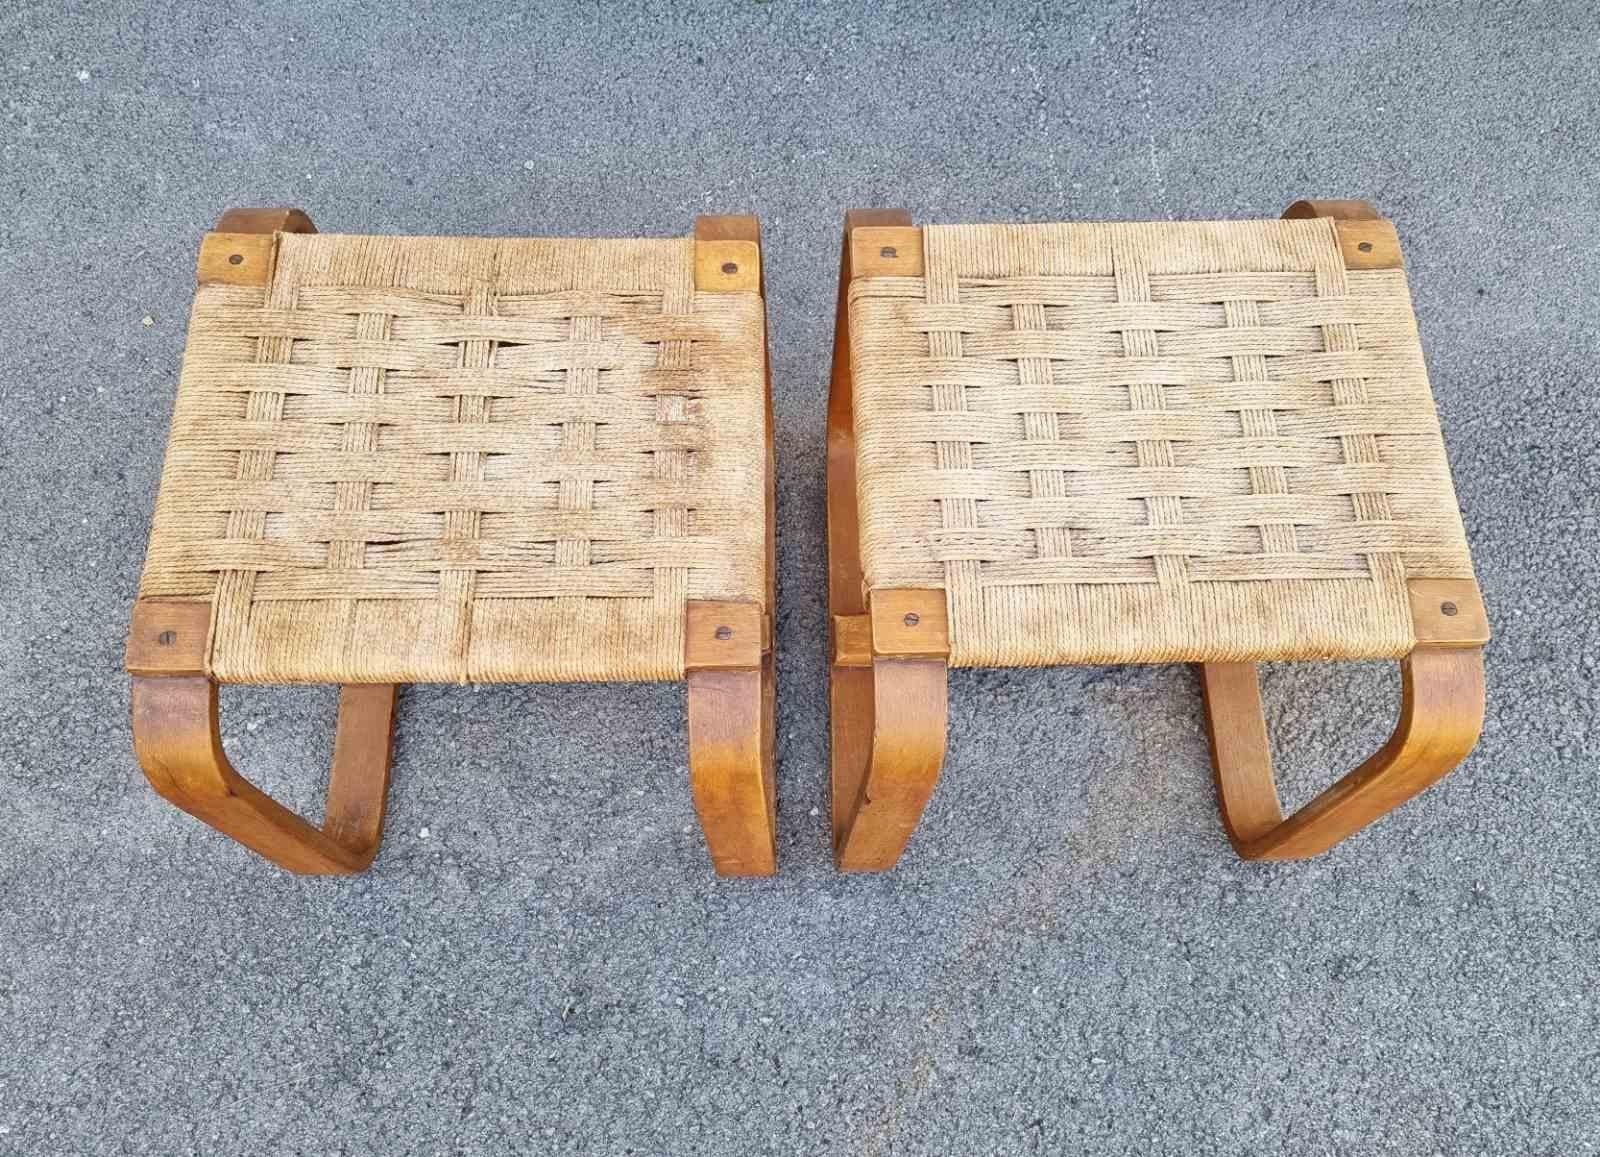 Rare Pair of Stools by Giuseppe Pagano Pogatschnig for Gino Maggioni, Italy 40s For Sale 4